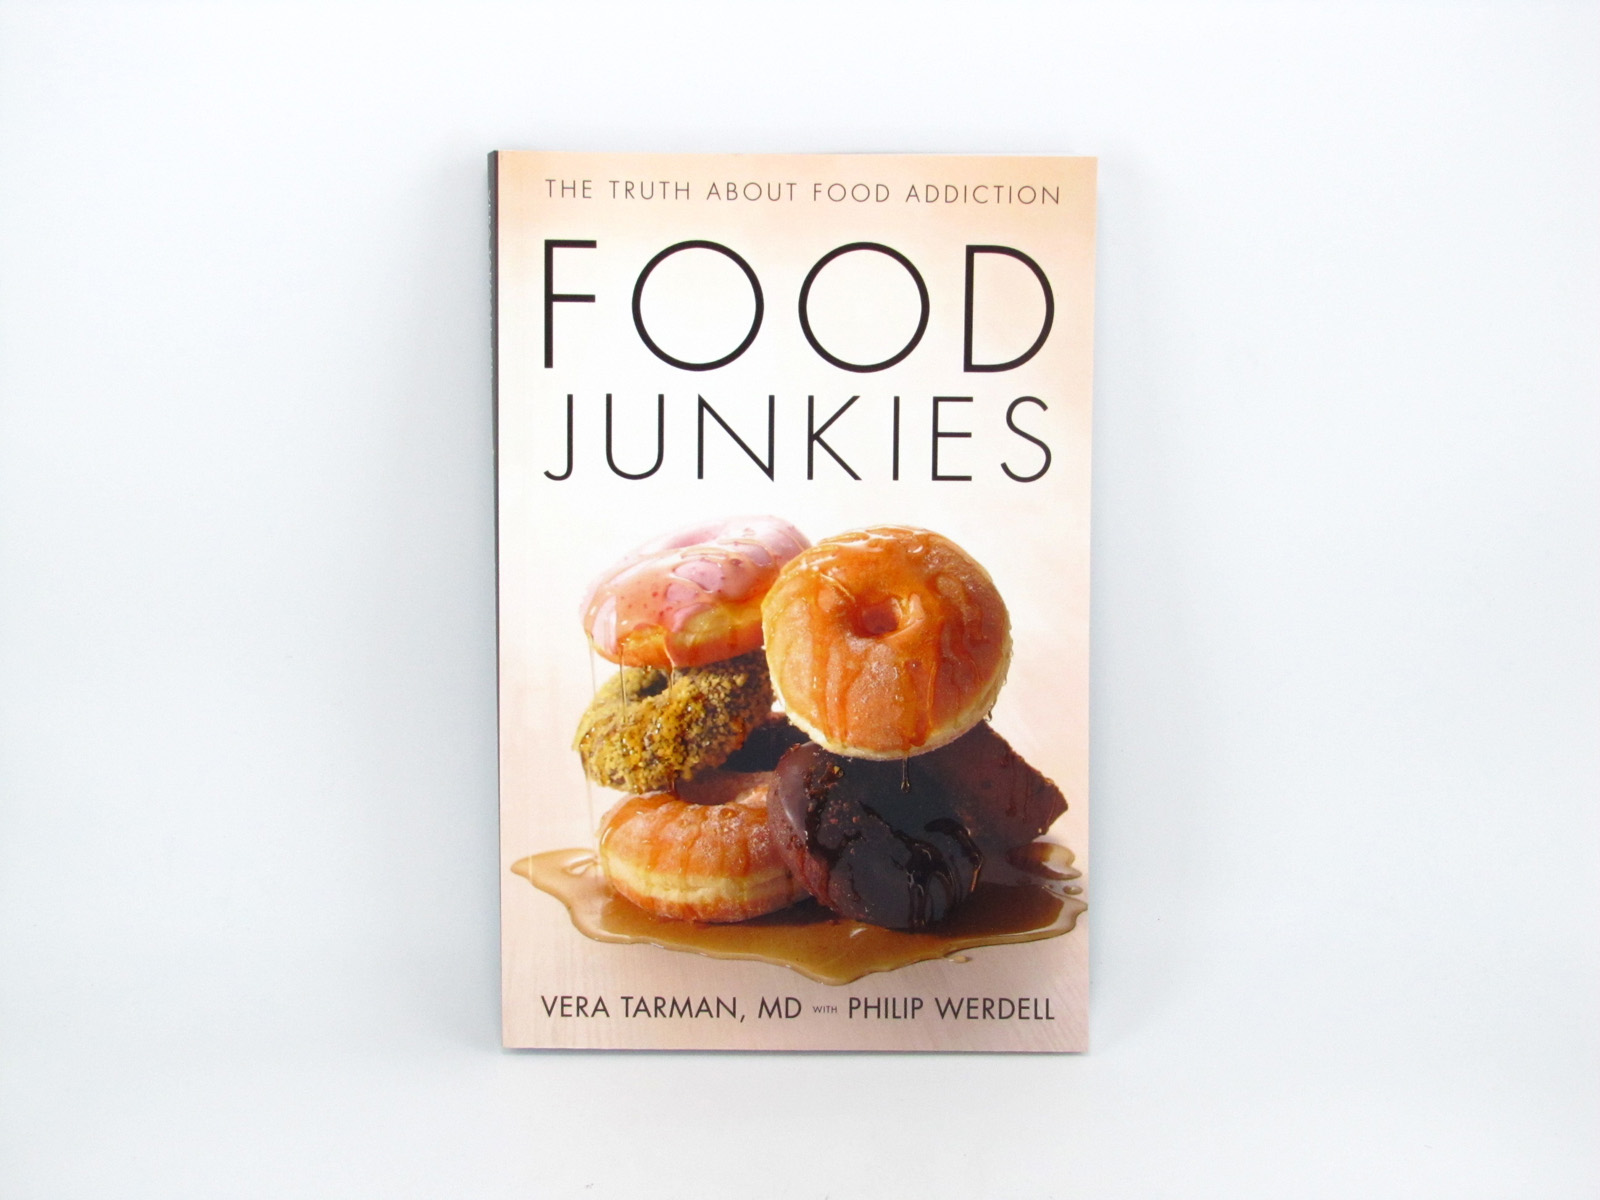 Dr. Tarman's Food Junkies book - front cover